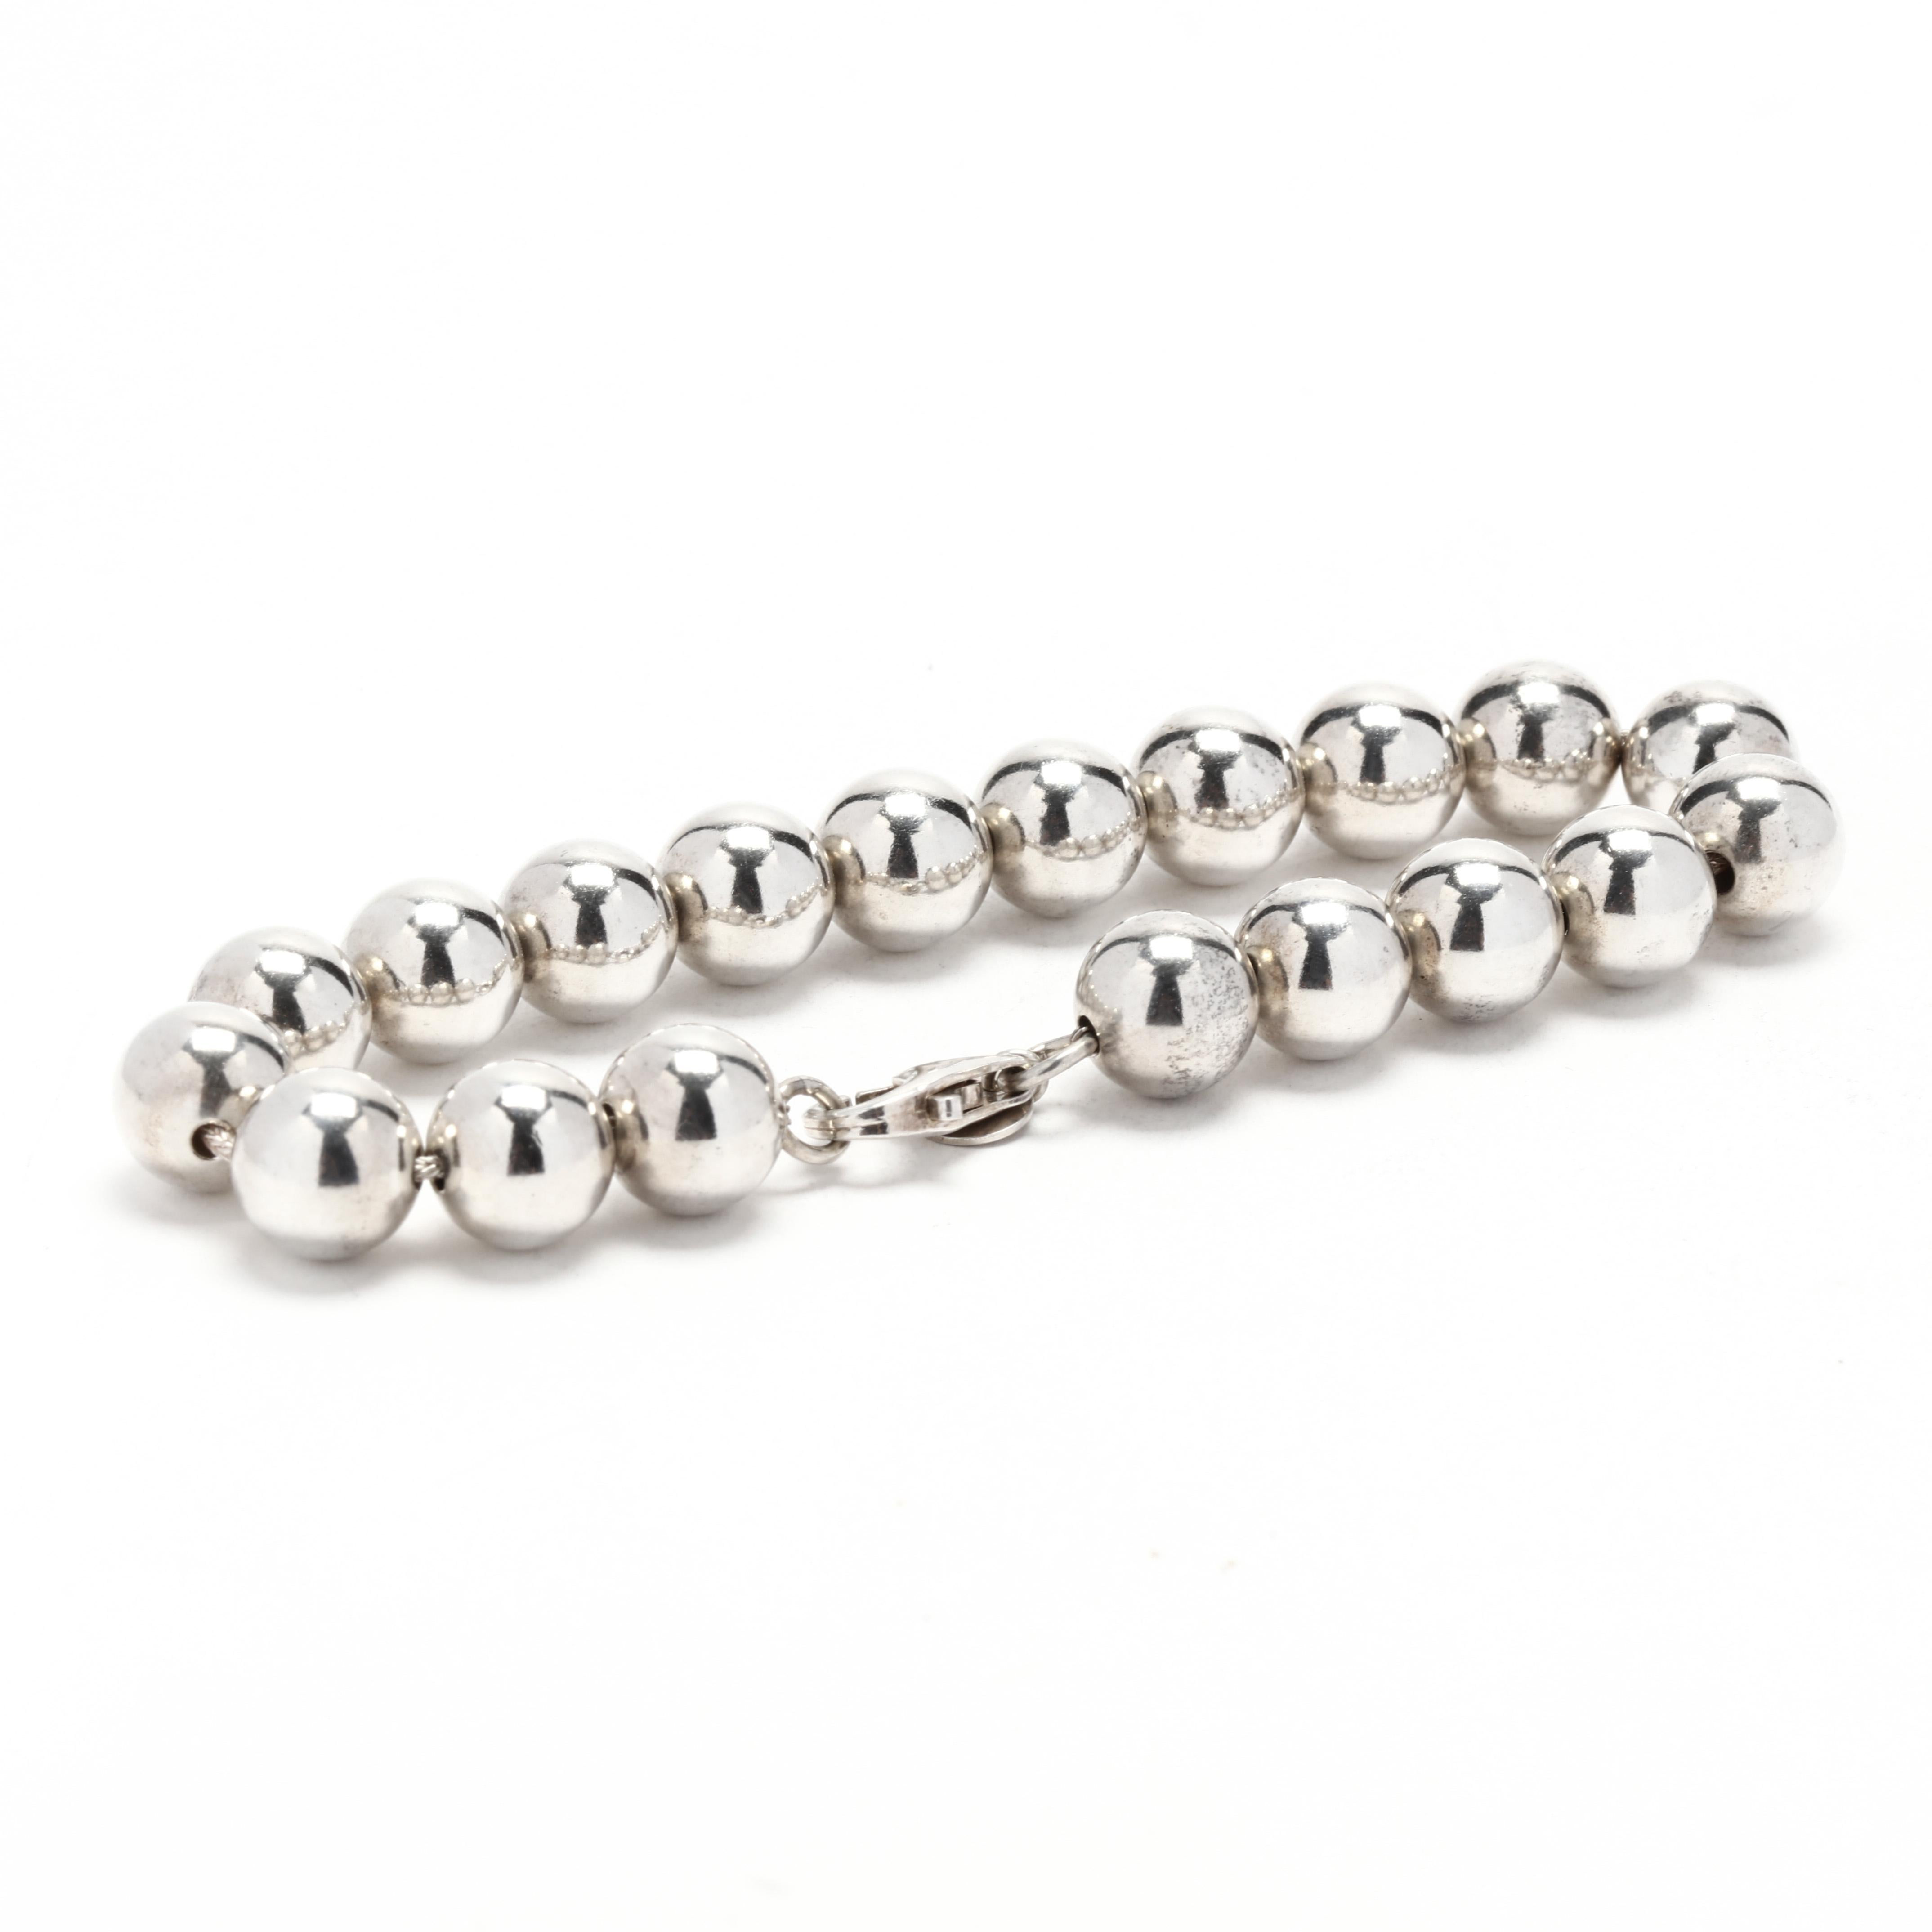 A sterling silver large polished beaded bracelet, This chunky bracelet is comprised of (19) round silver beads and is completed in a lobster clasp.  It is stamped 925 R.

Length: 8 1/8 inches

Width: 3/8 inch

Weight: 12.9 dwt. / 20 grams

Metal: